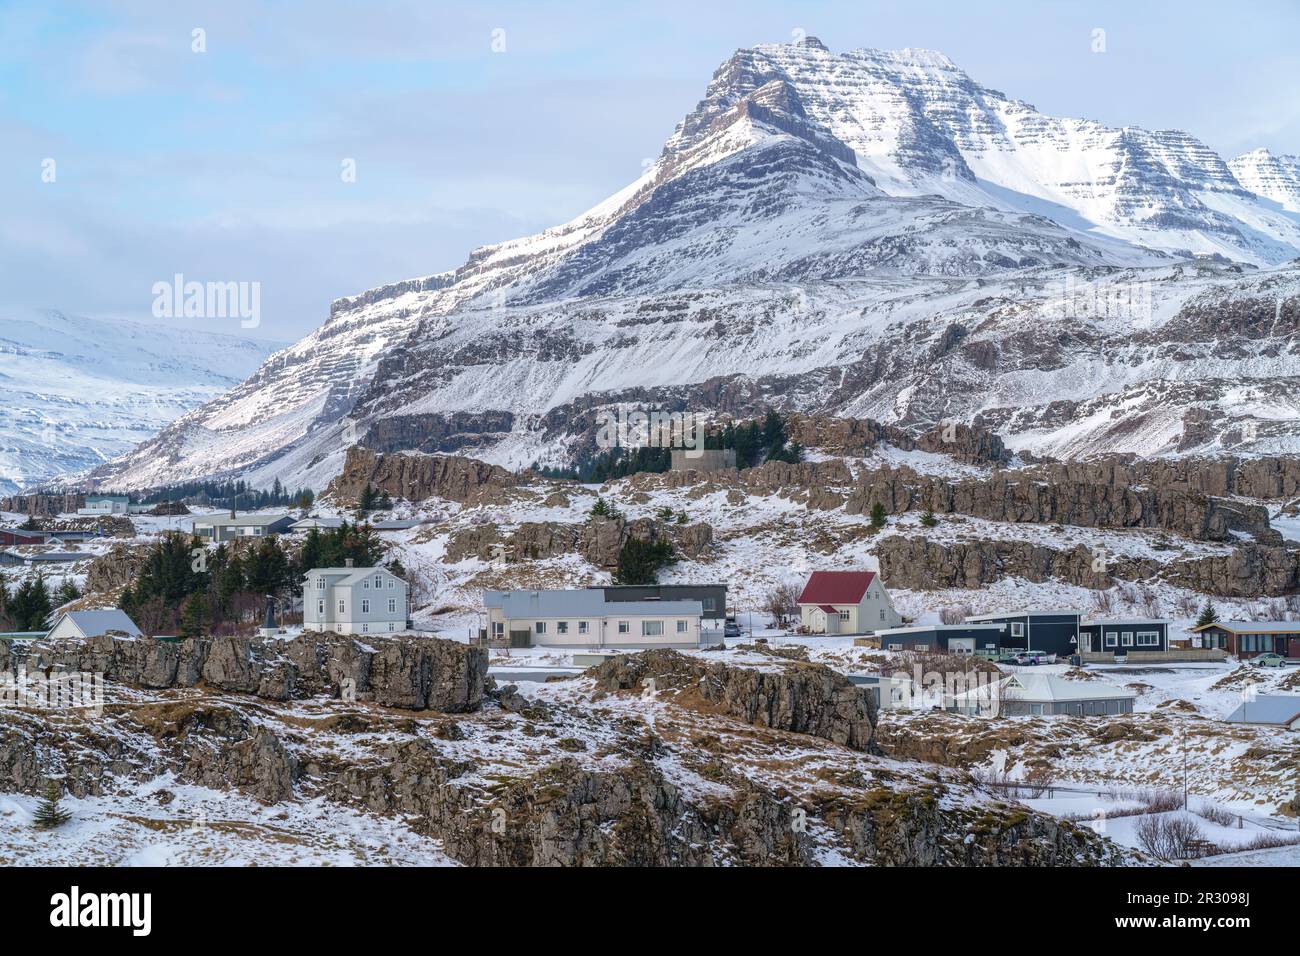 Djúpivogur is a small fishing town located in the Austurland (Eastern Region) part of Iceland close to the Vatnajökull National Park. Stock Photo